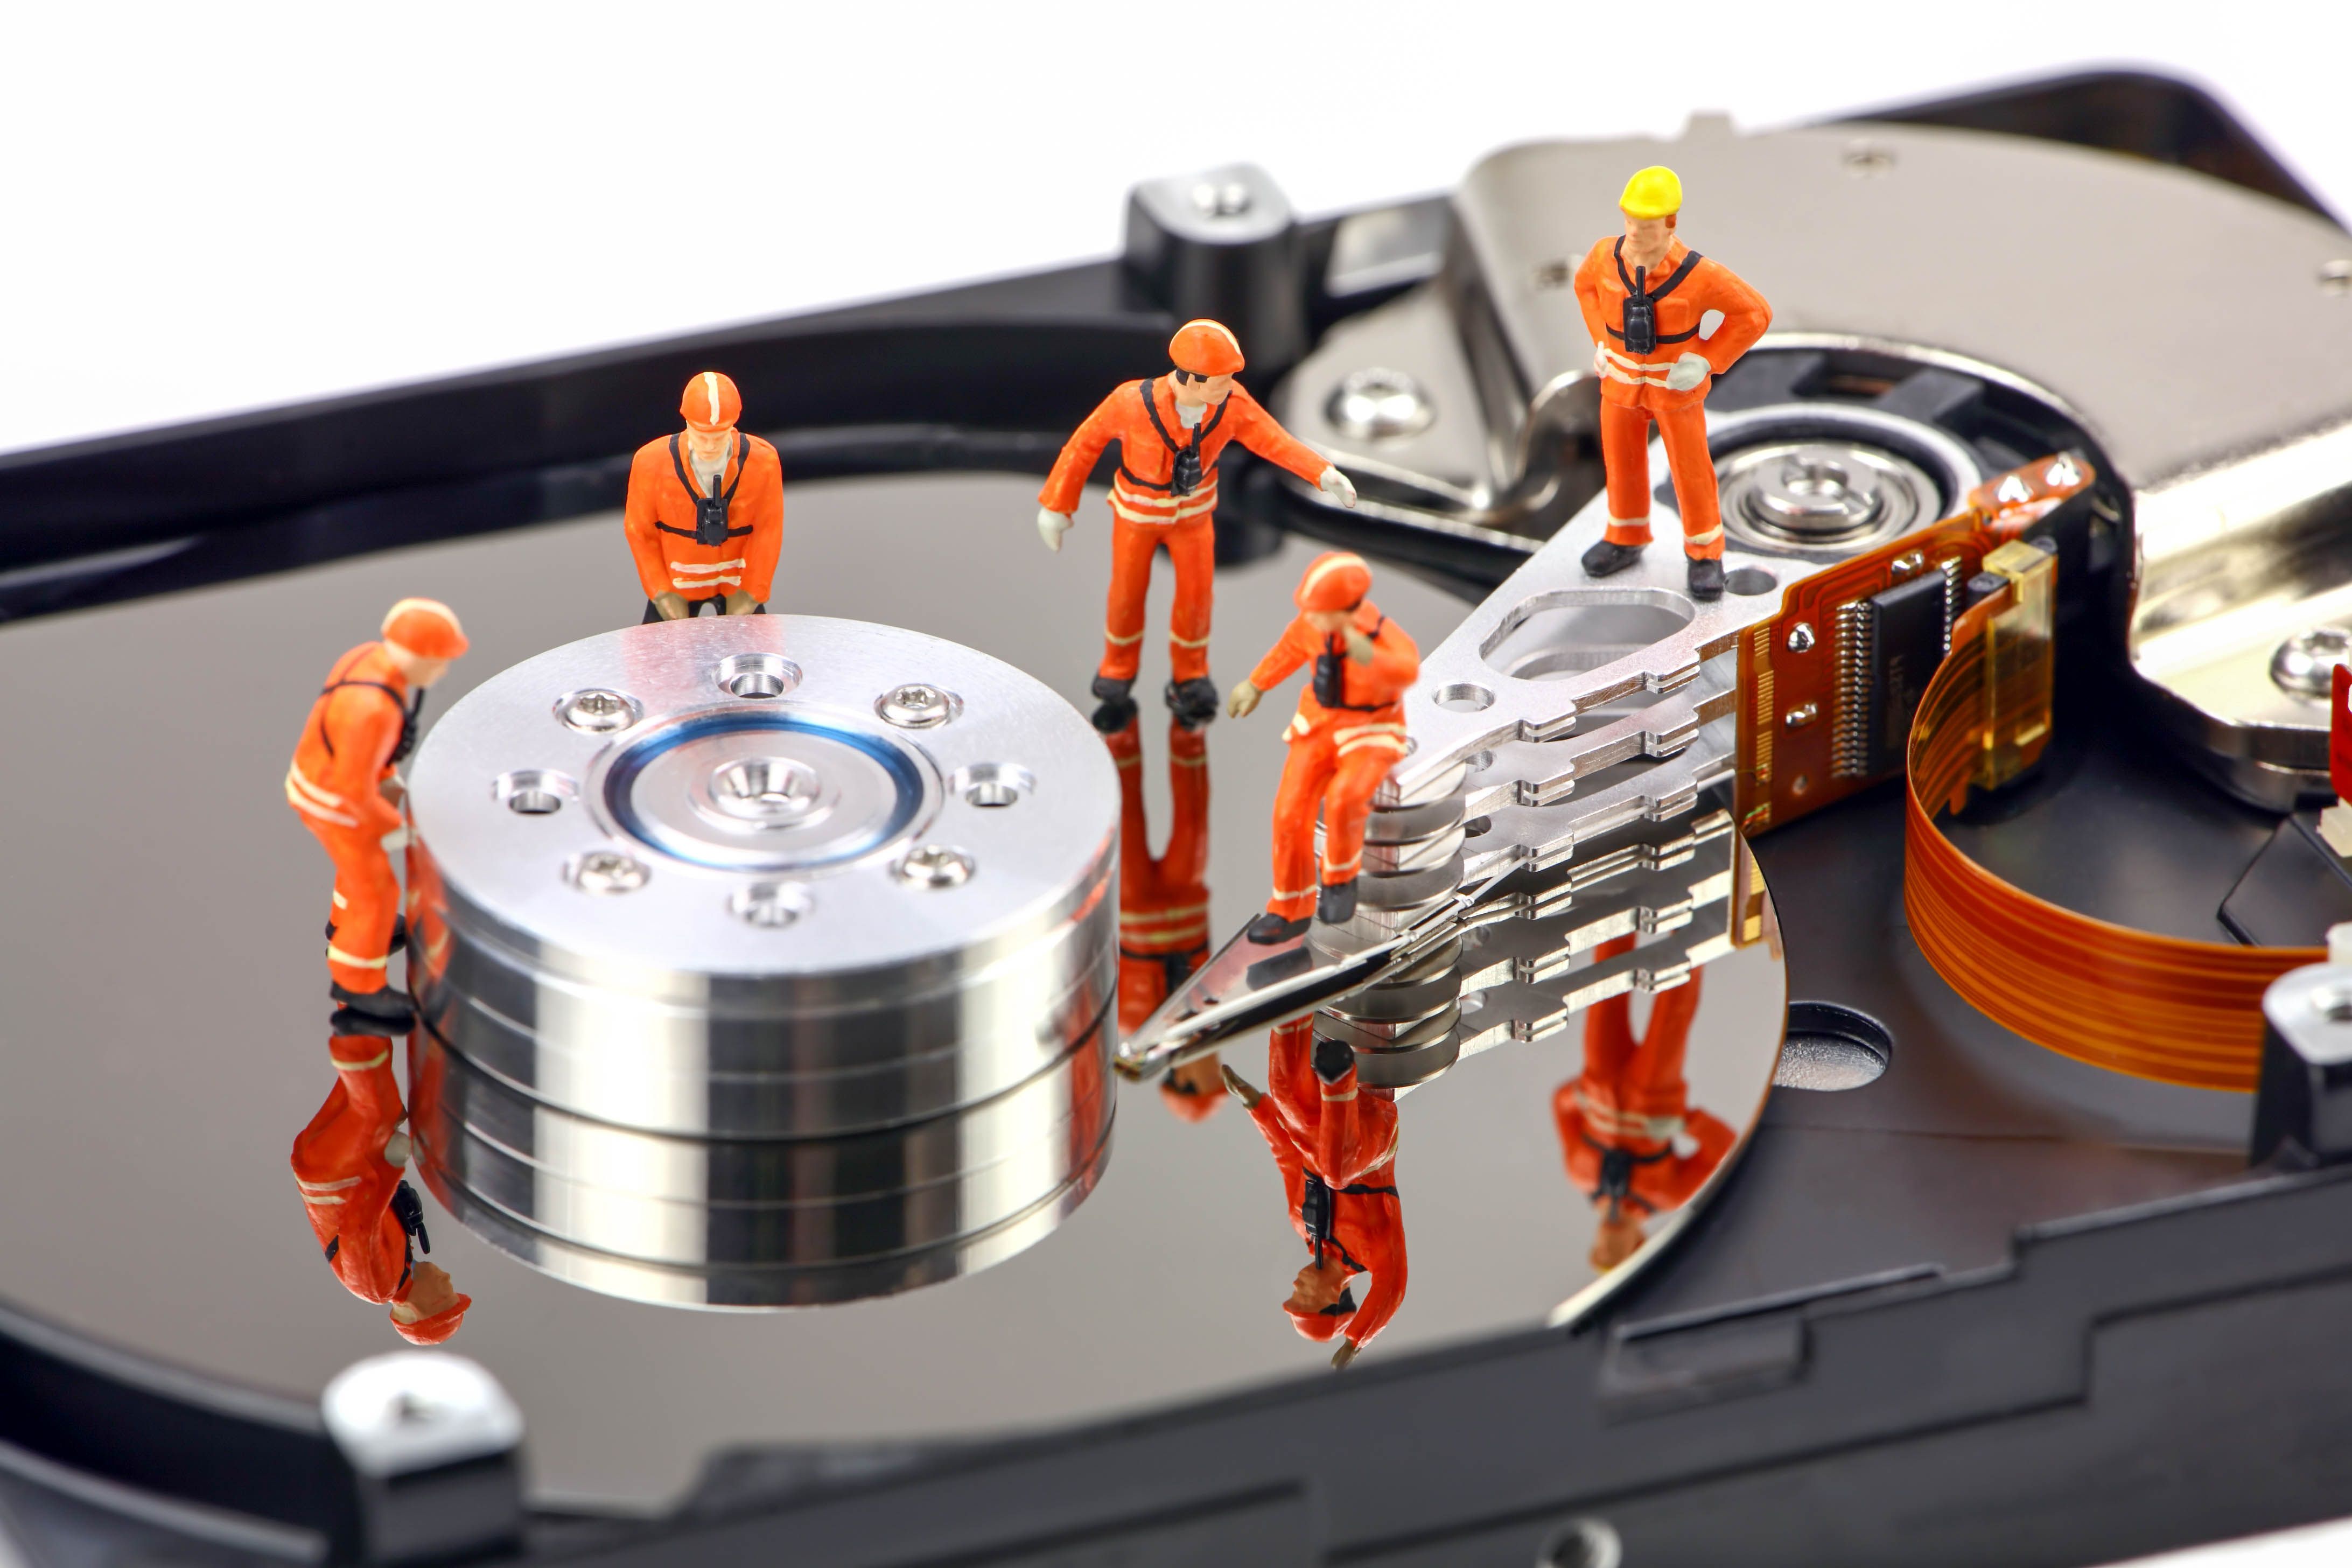 Hard Disk Drive Wallpapers